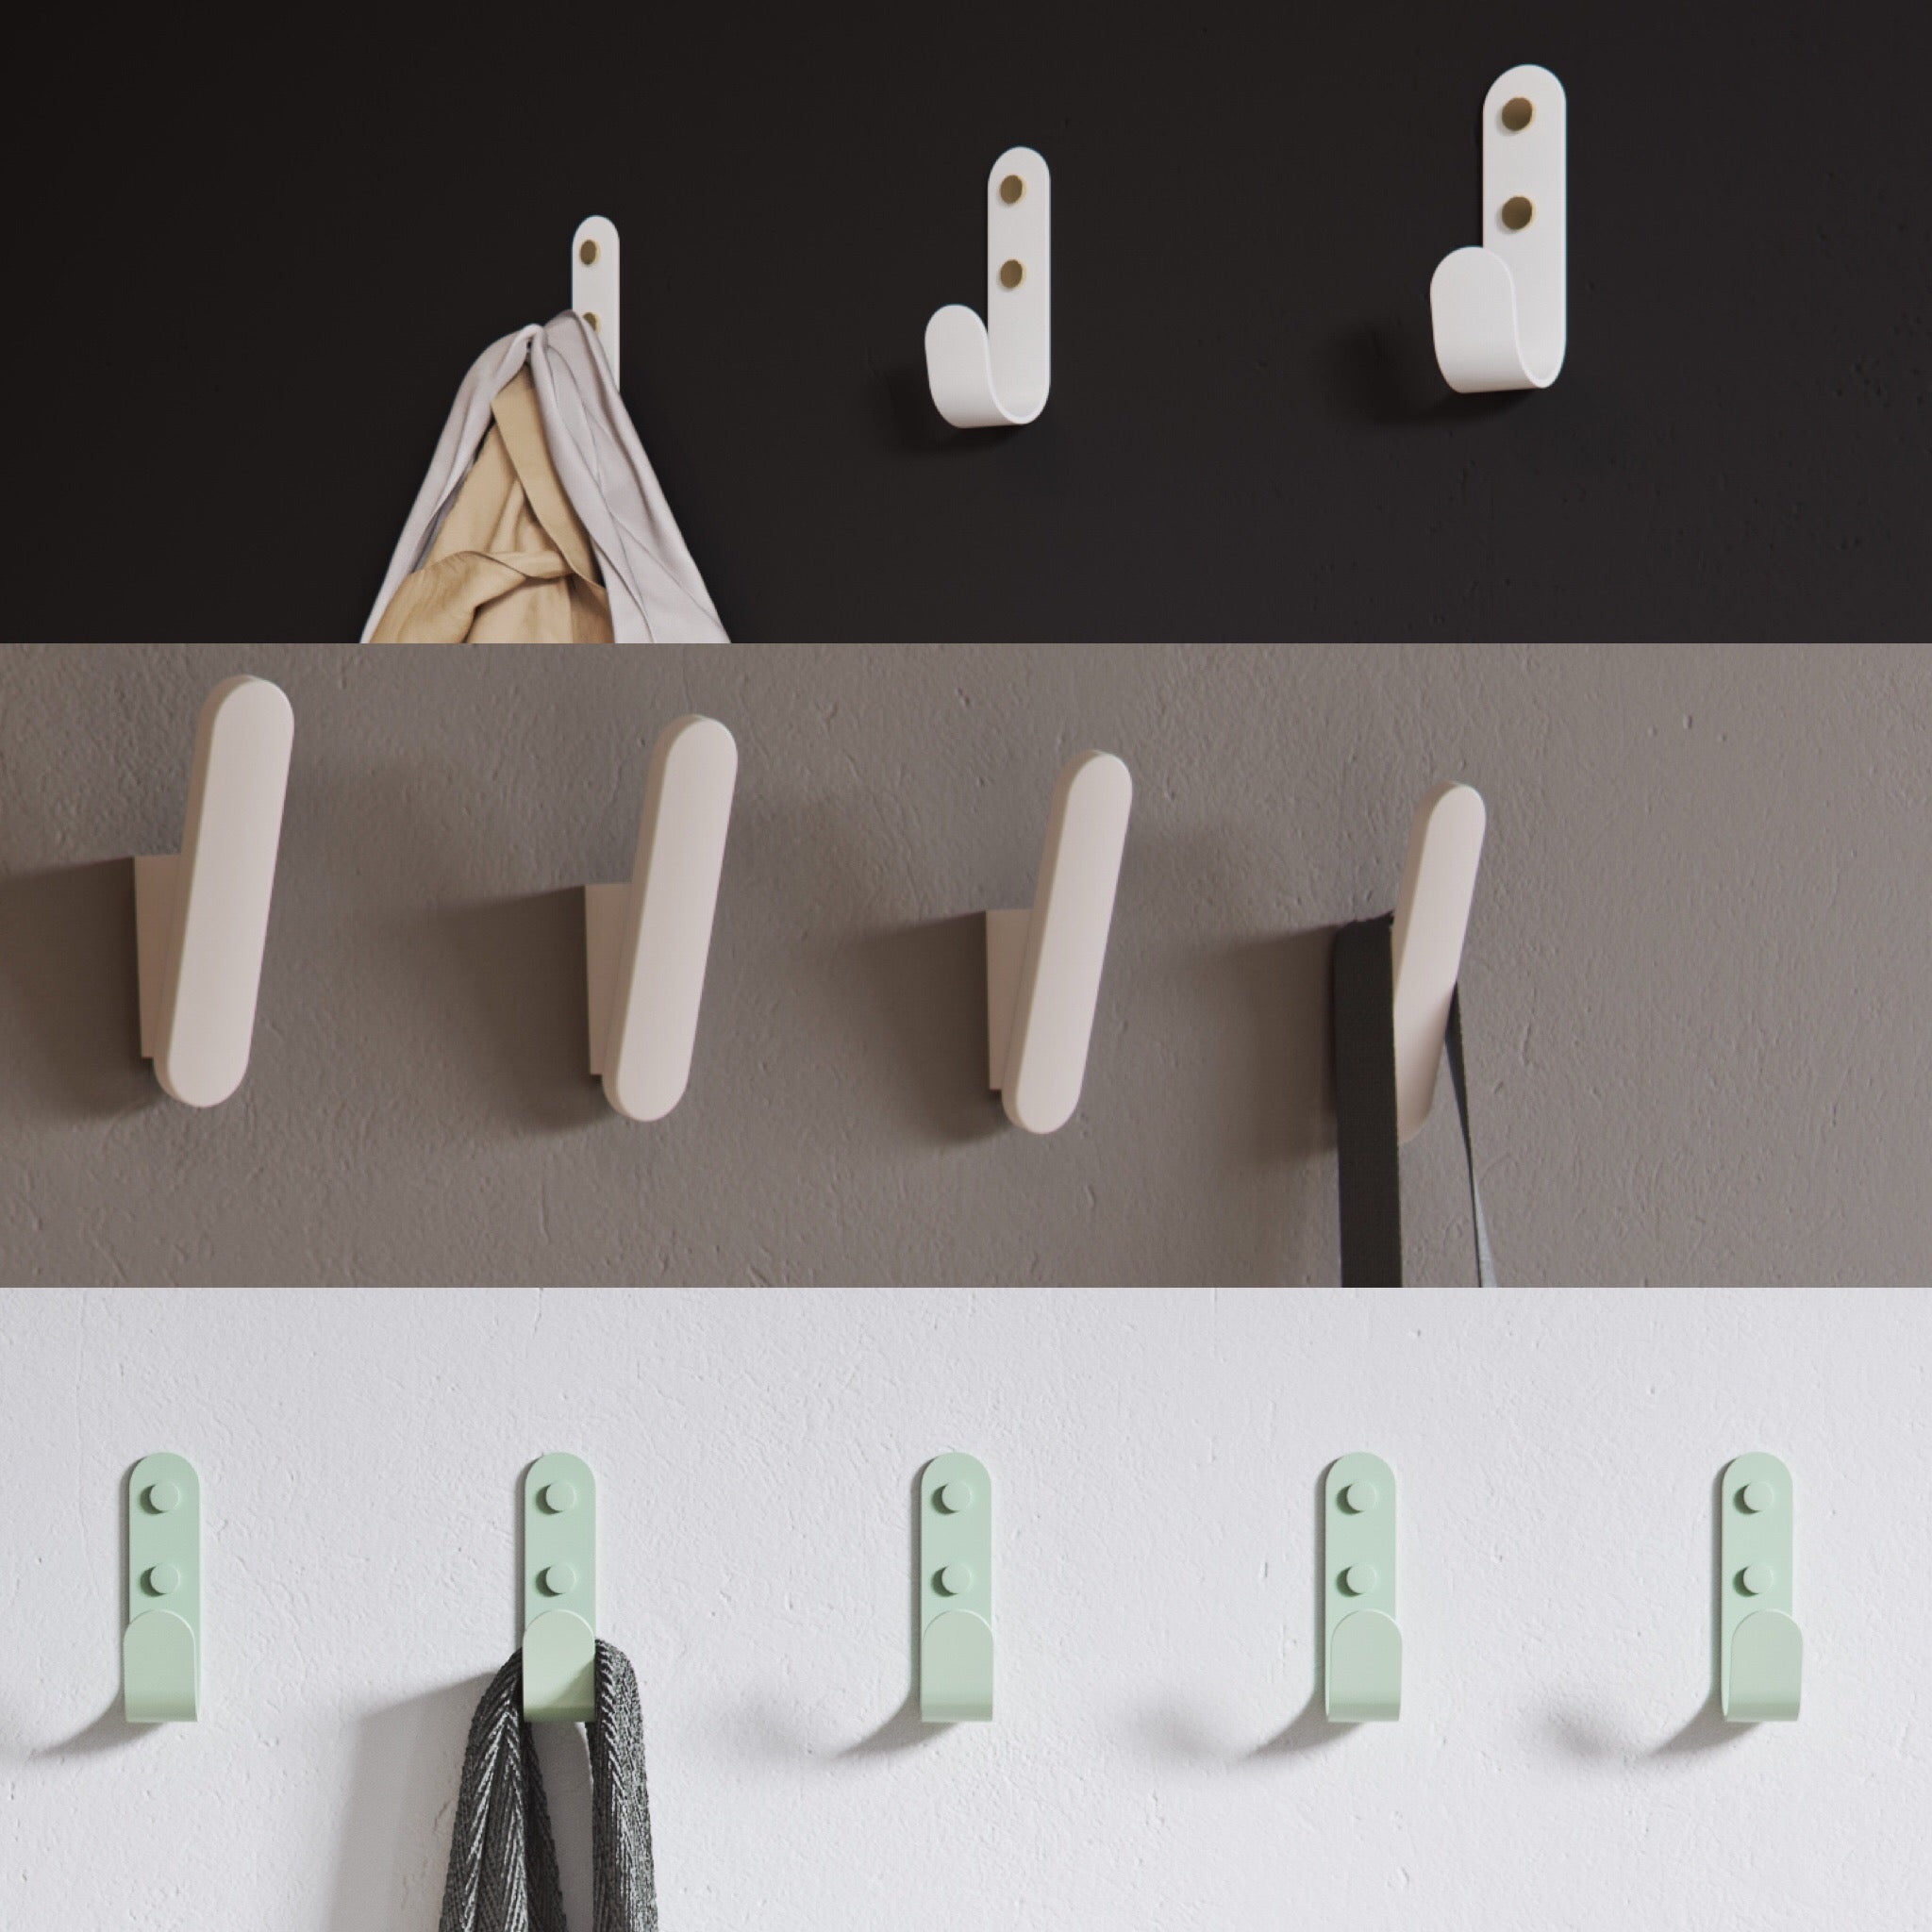 NEW RELEASE: Tallo steel and wood wall hooks - The Hairpin Leg Co.